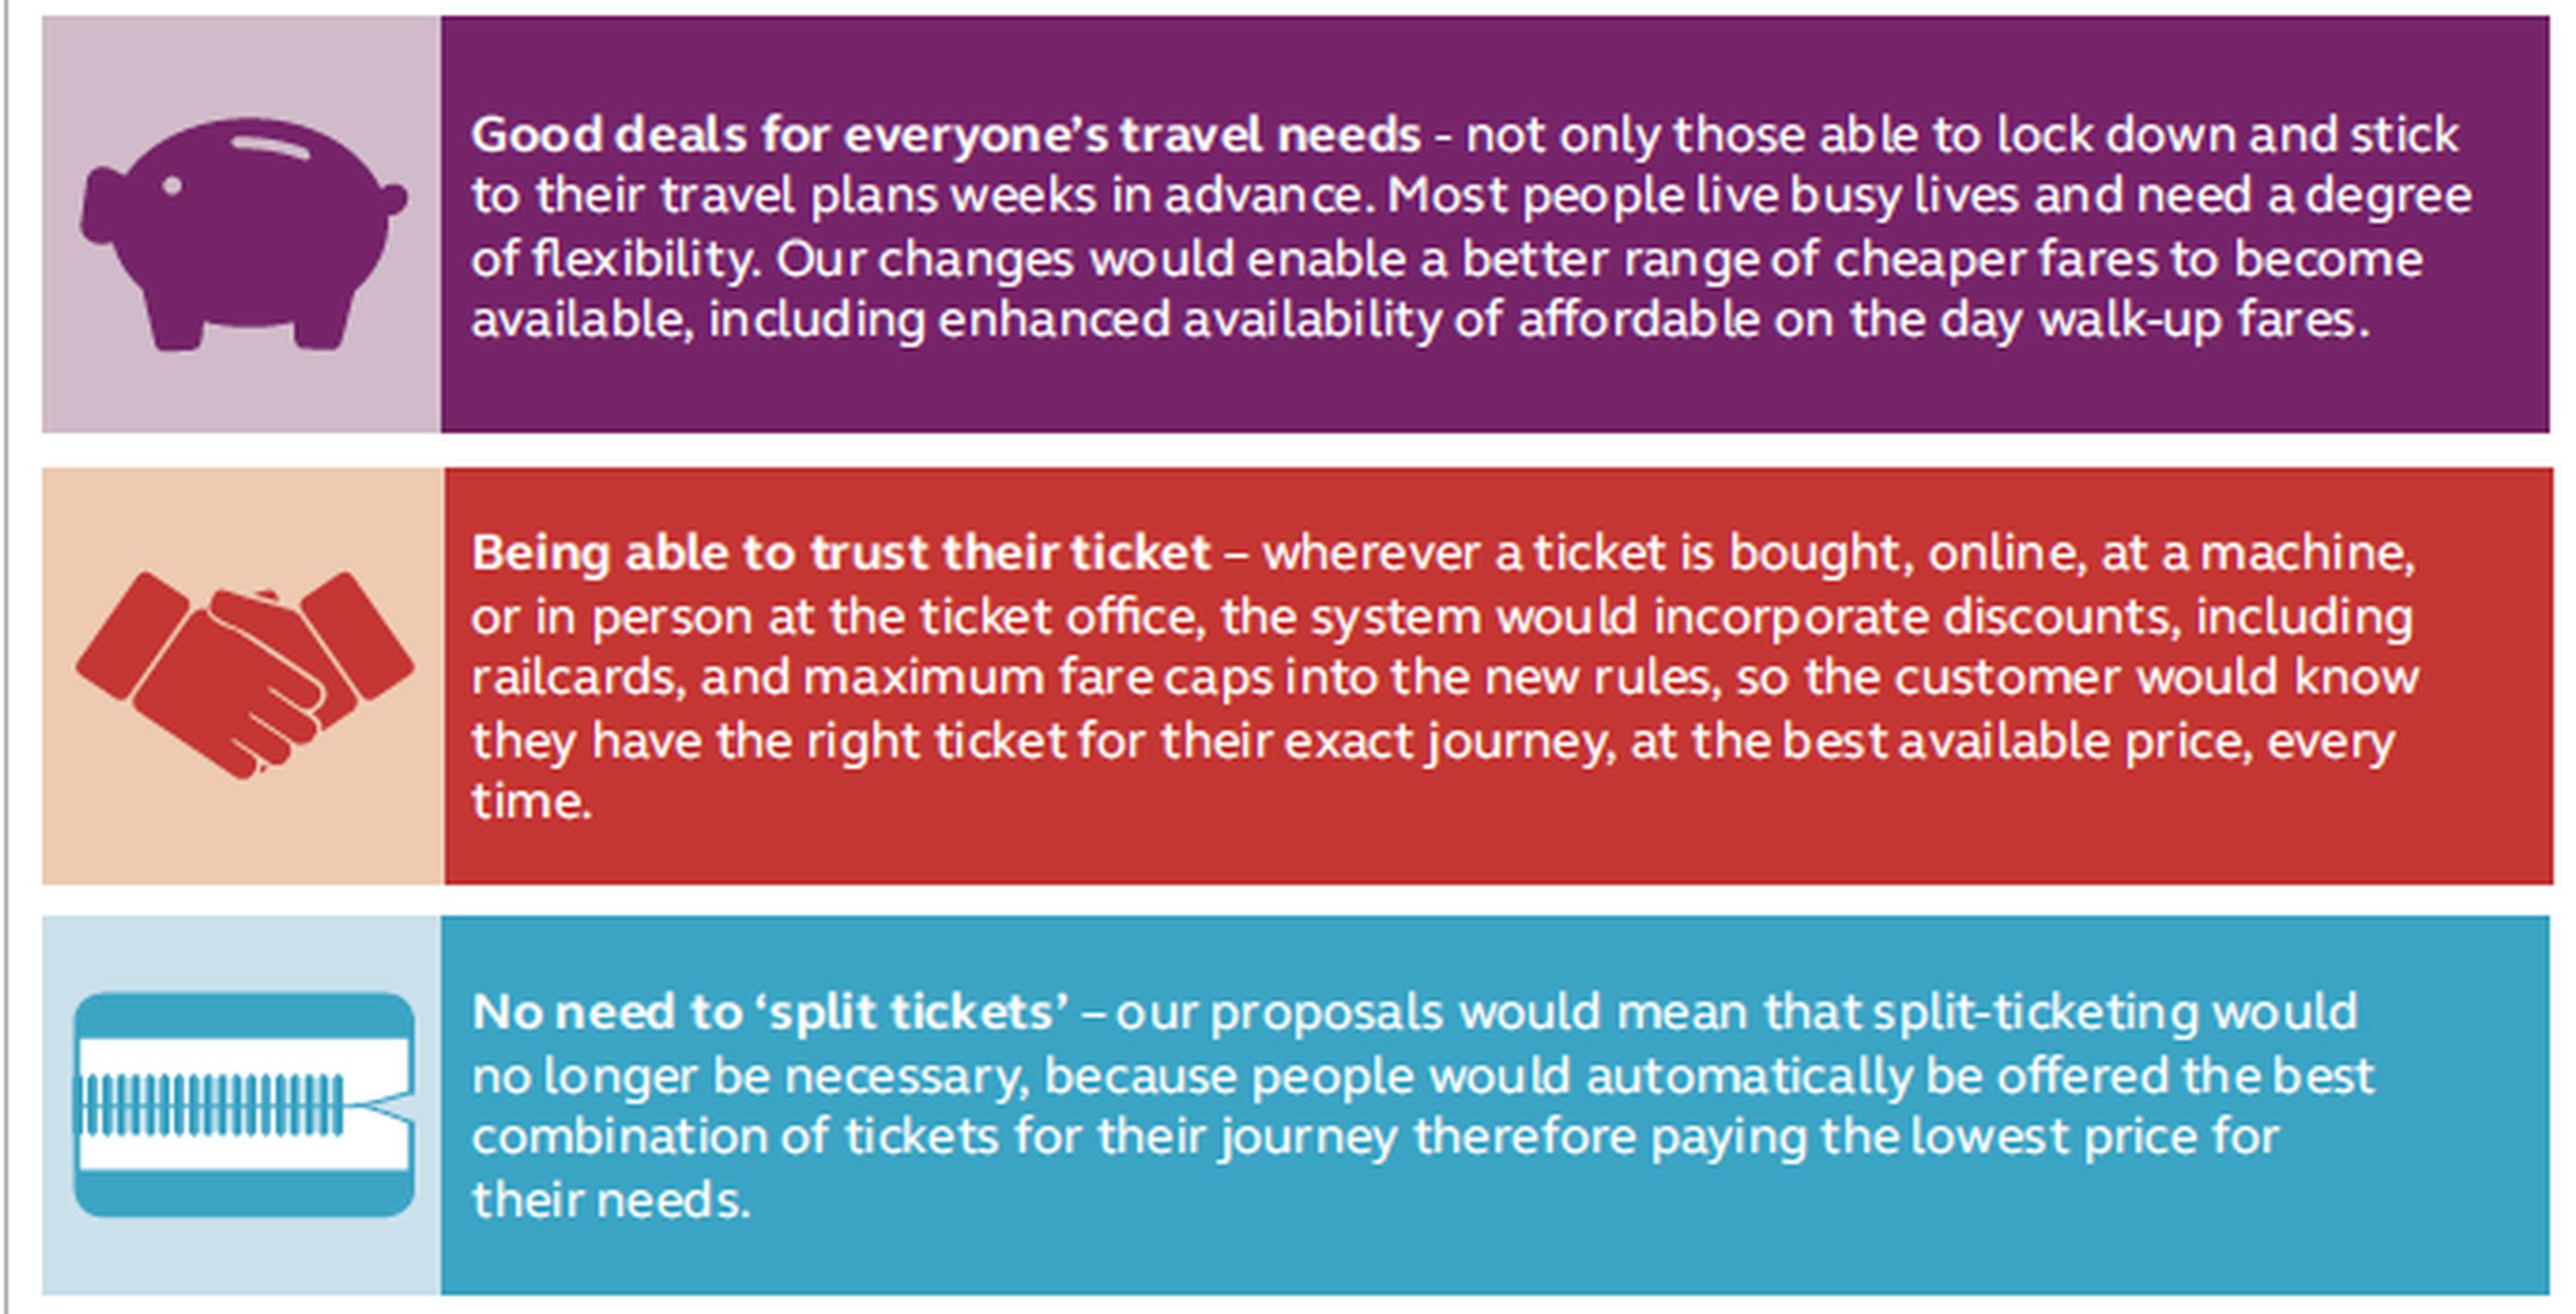 A recent Rail Delivery Group (RDG) review called for more flexible, individualised, ‘fairer’ fare models